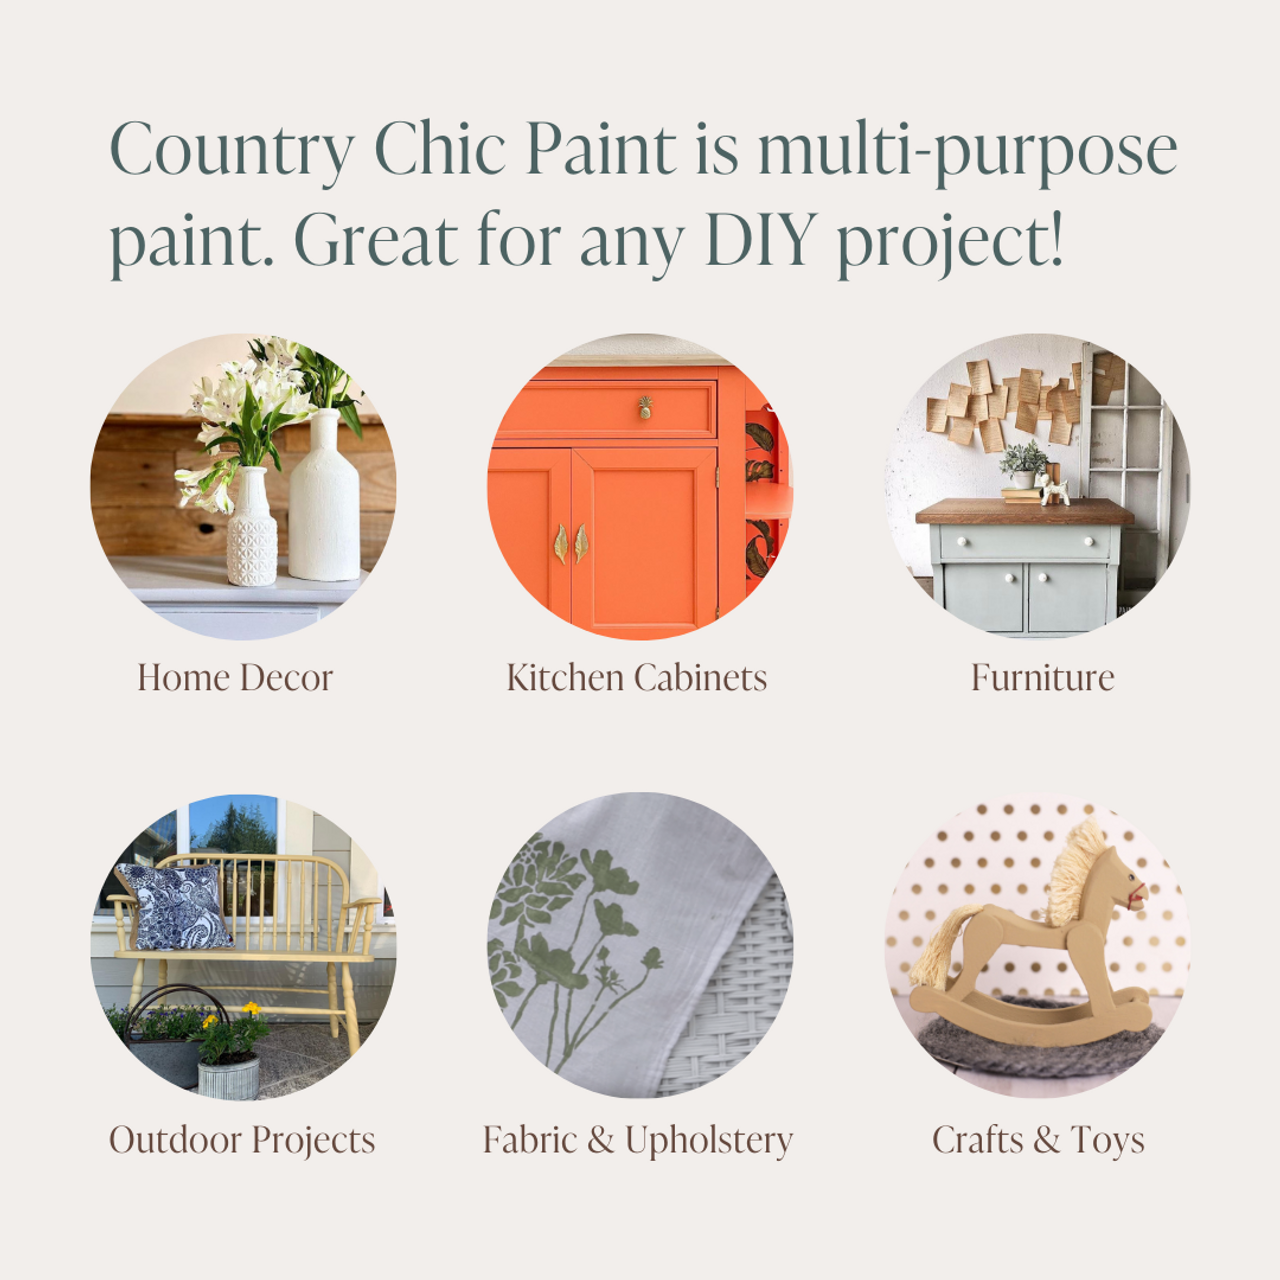 Shabby Chic Chalk Furniture Paint: Luxurious Chalk Finish Craft Paint for Home Decor, DIY, Wood Cabinets - All-in-One Paints with Rustic Matte